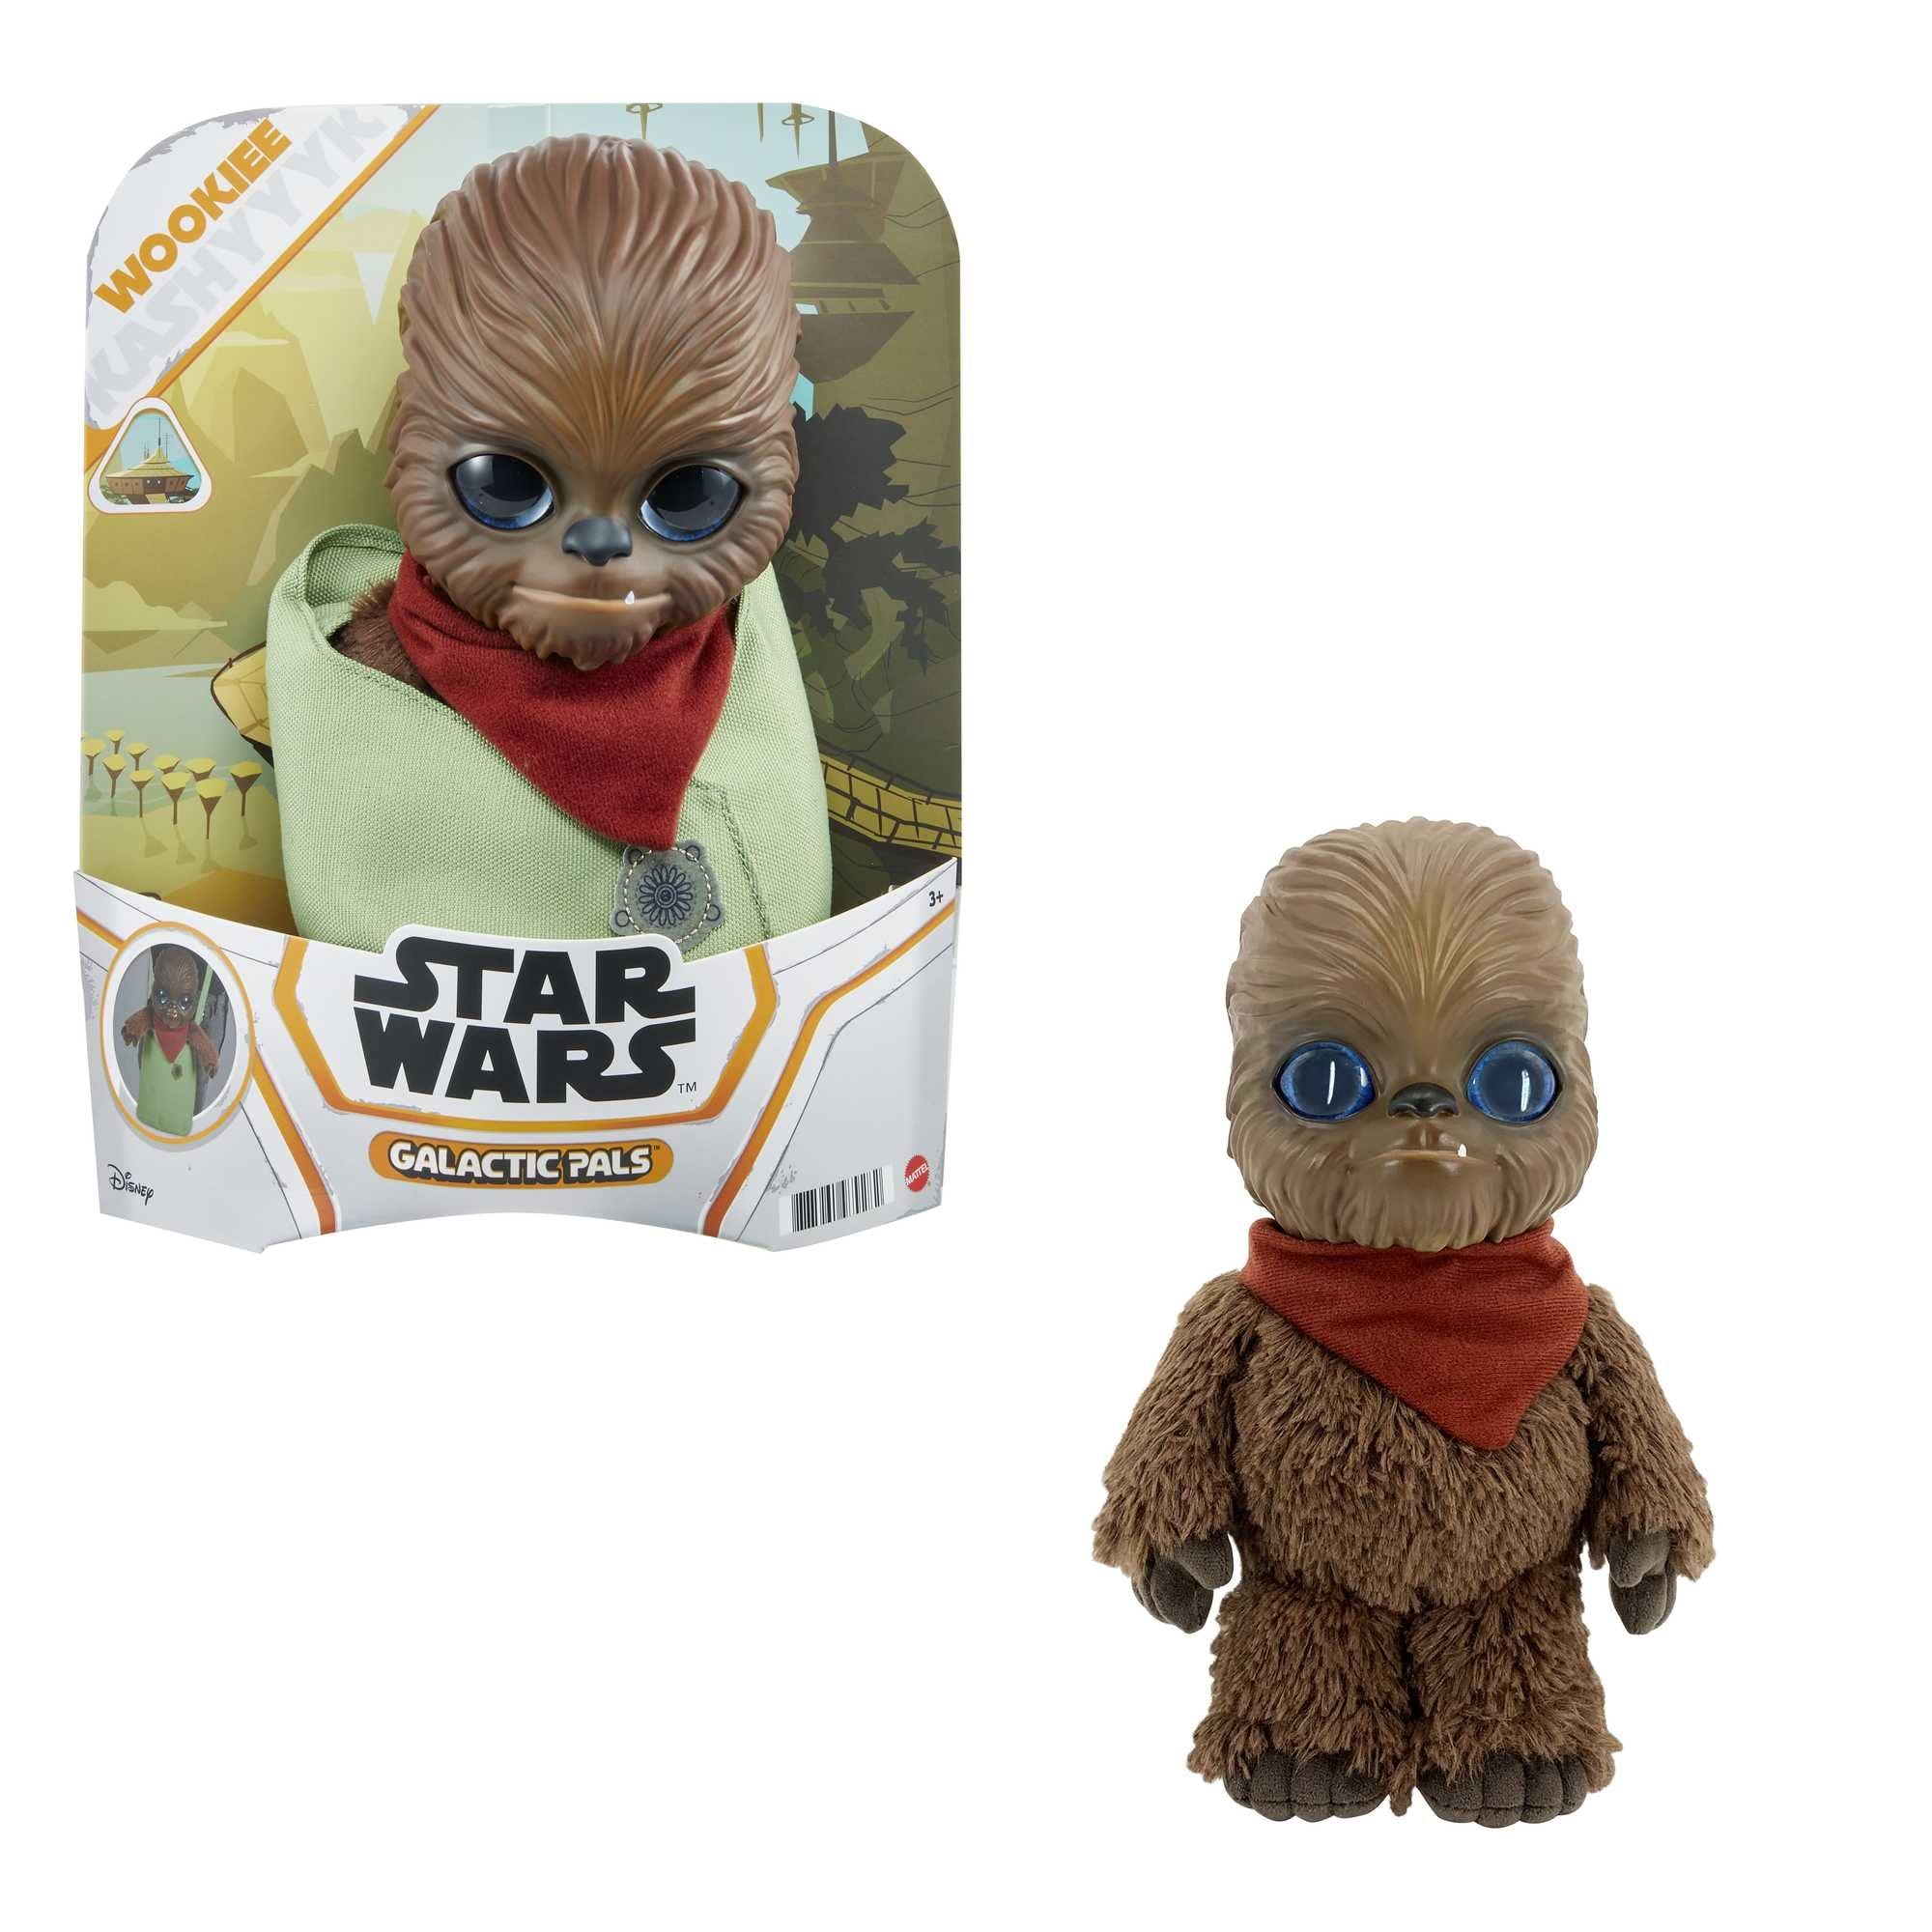 11" Star Wars Galactic Pals Plush w/ Carrier (Wookiee) $9.87 + Free Shipping w/ Prime or on $35+